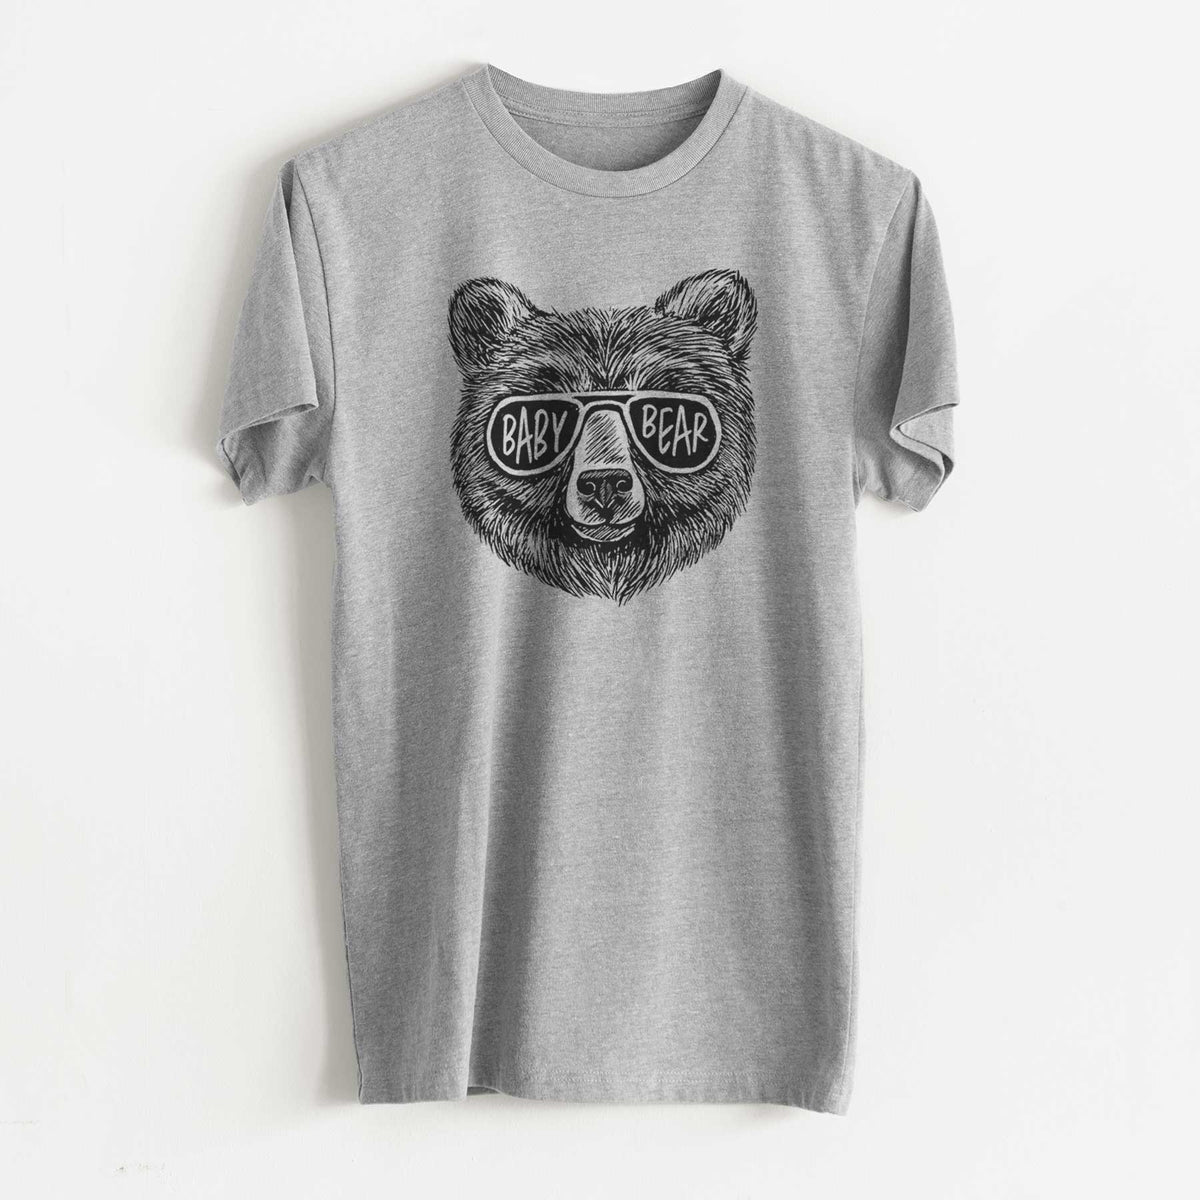 Baby Bear - Unisex Recycled Eco Tee  - CLOSEOUT - FINAL SALE